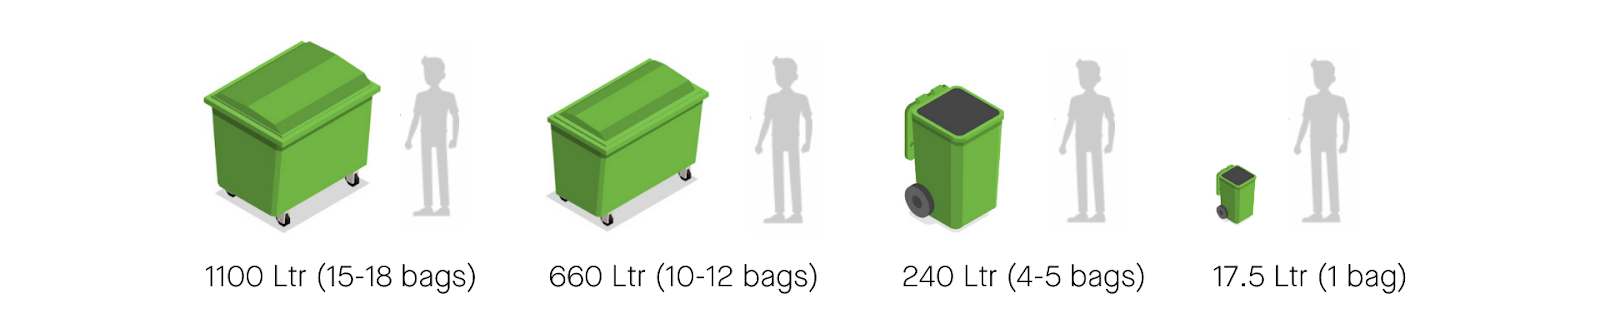 various commercial waste bin sizes